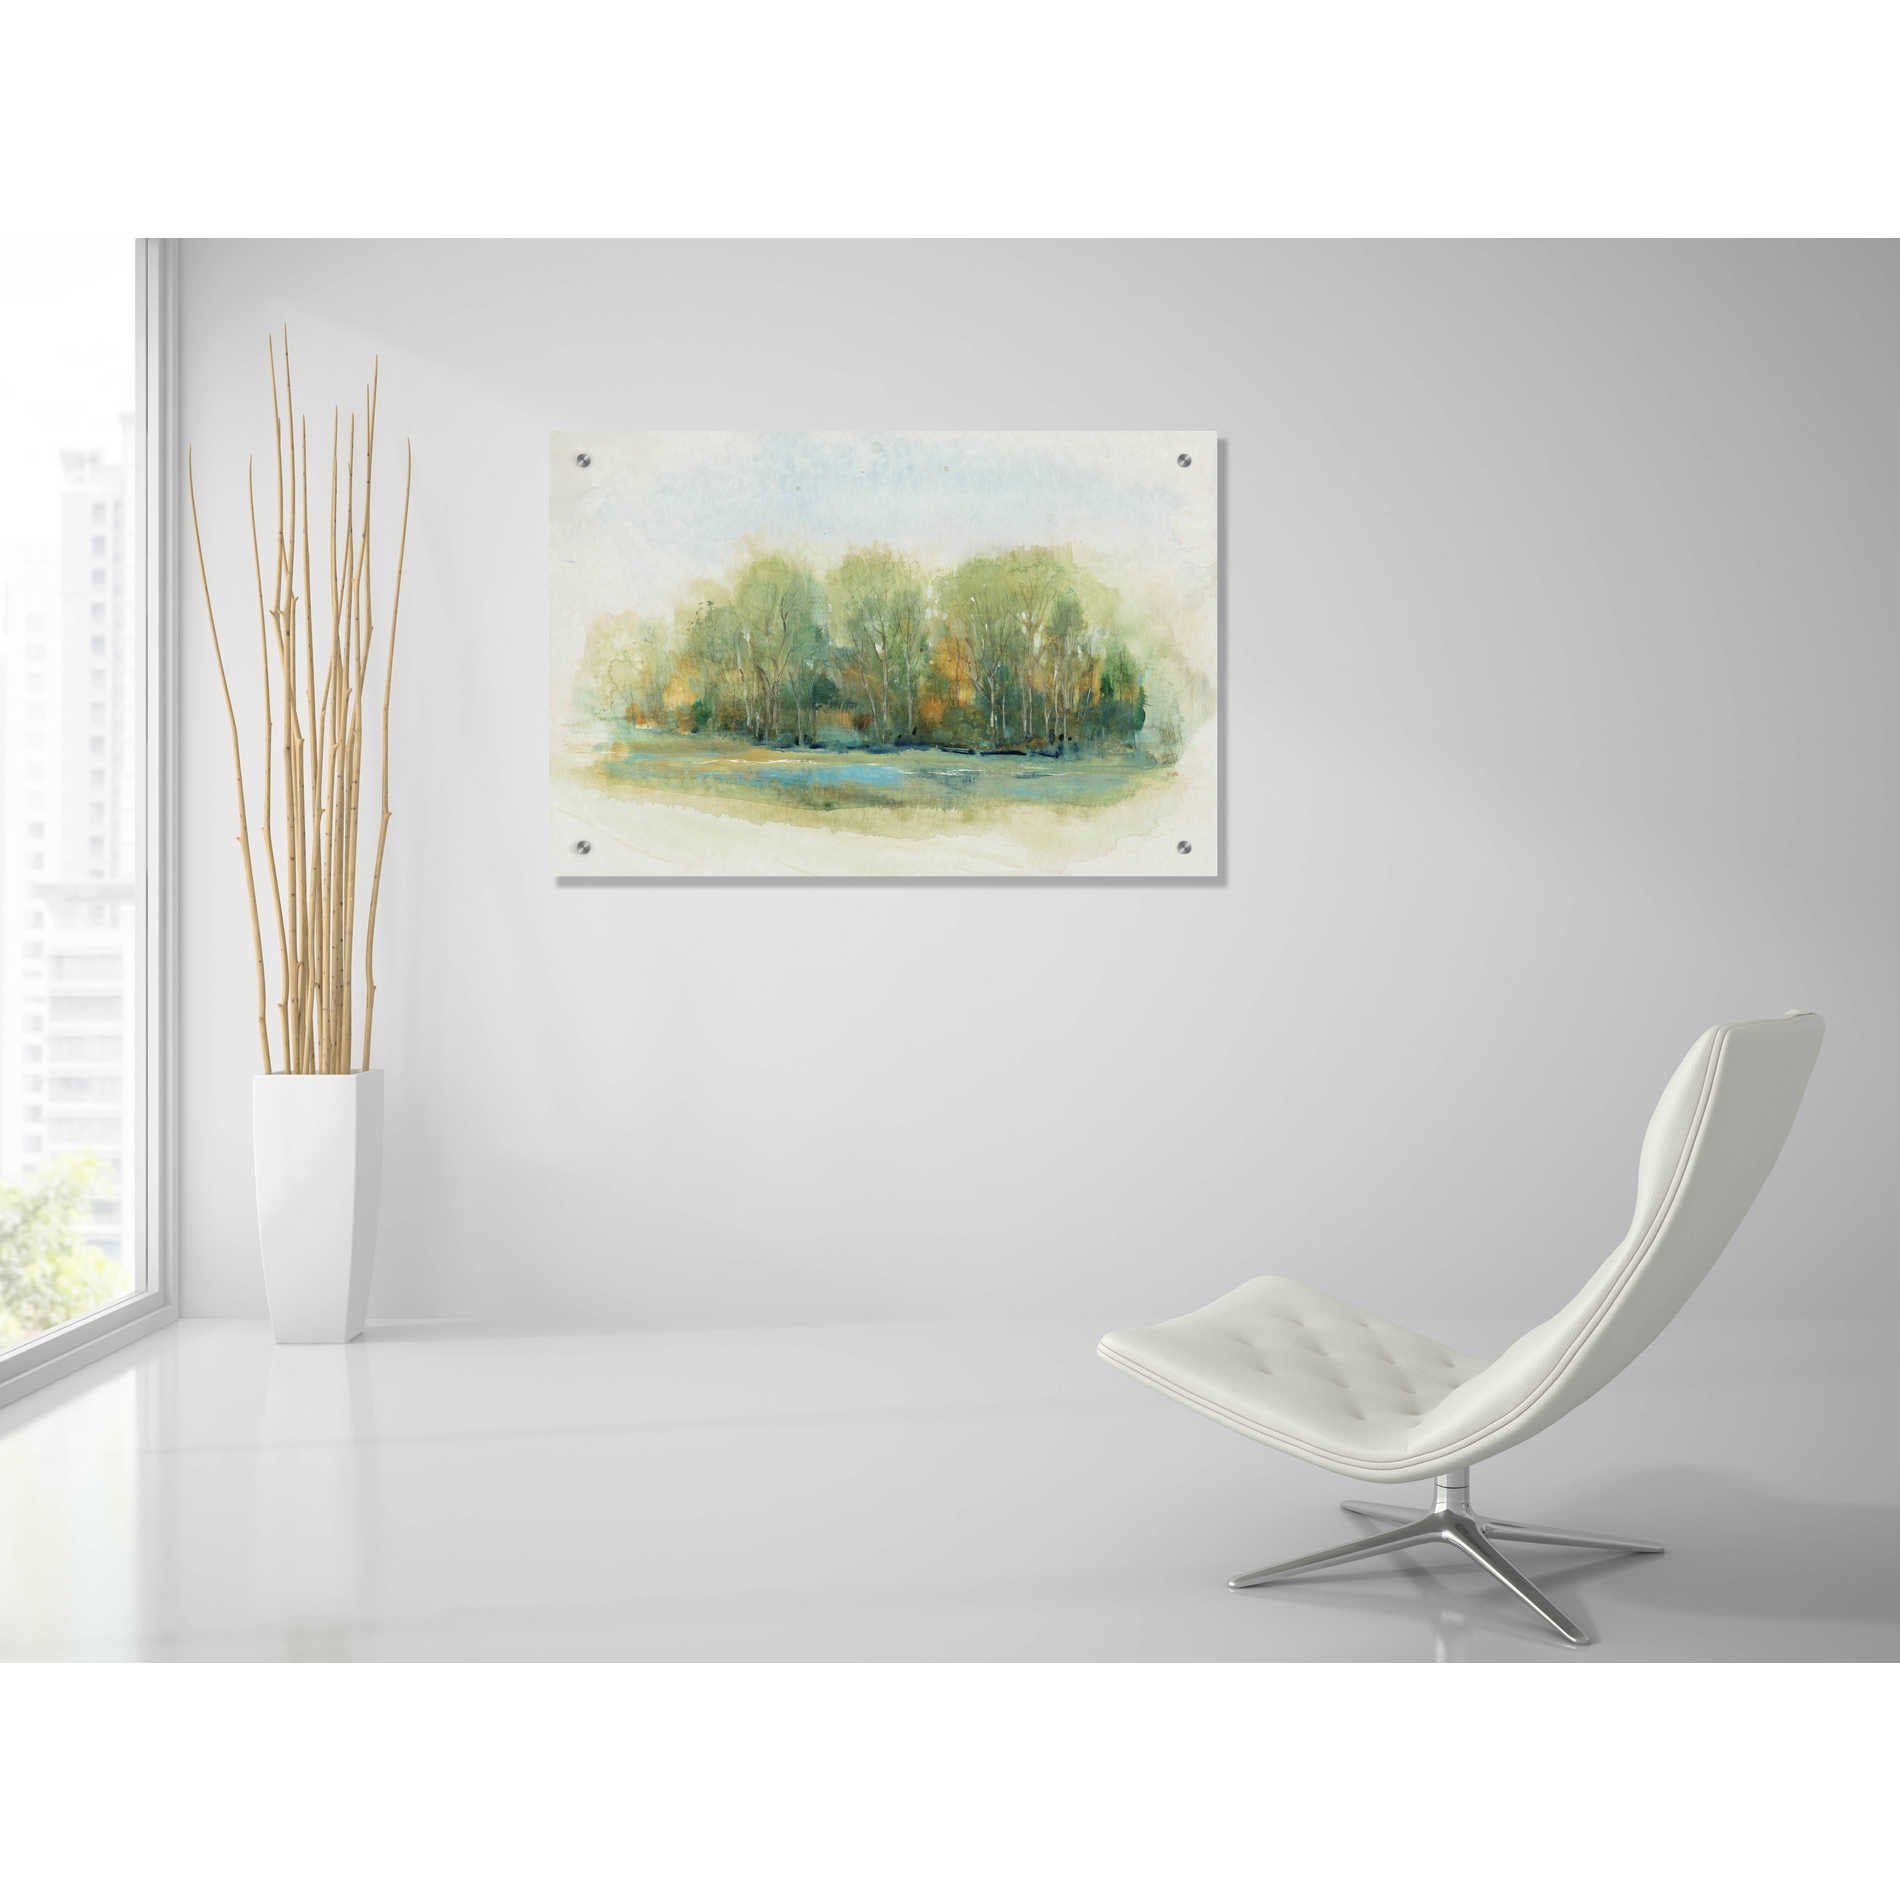 Epic Art 'Forest Vignette I' by Tim O'Toole, Acrylic Glass Wall Art,36x24